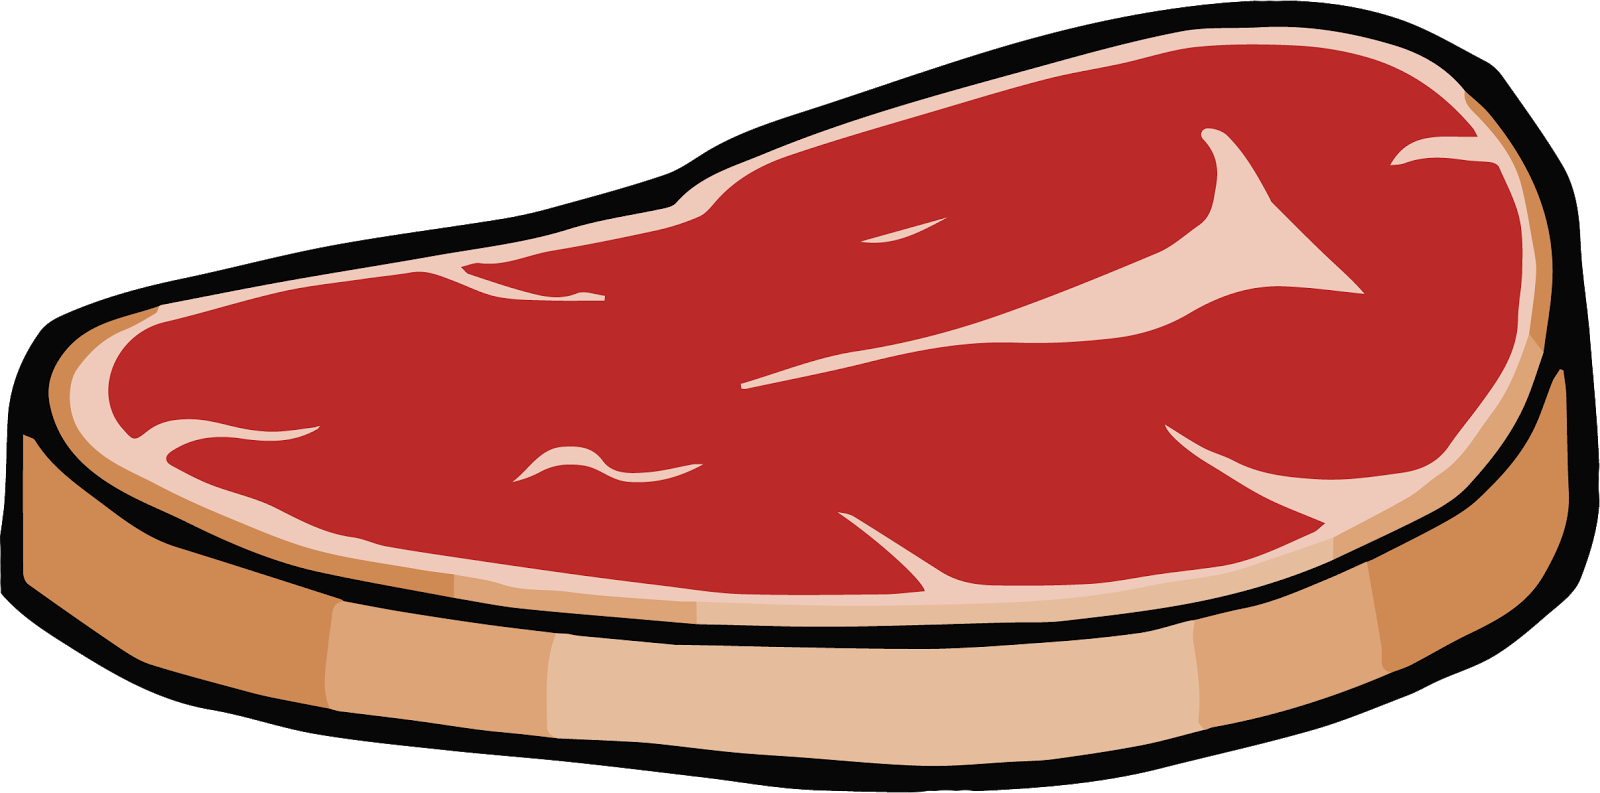 Steak Meats Protein Kid Png Image Clipart